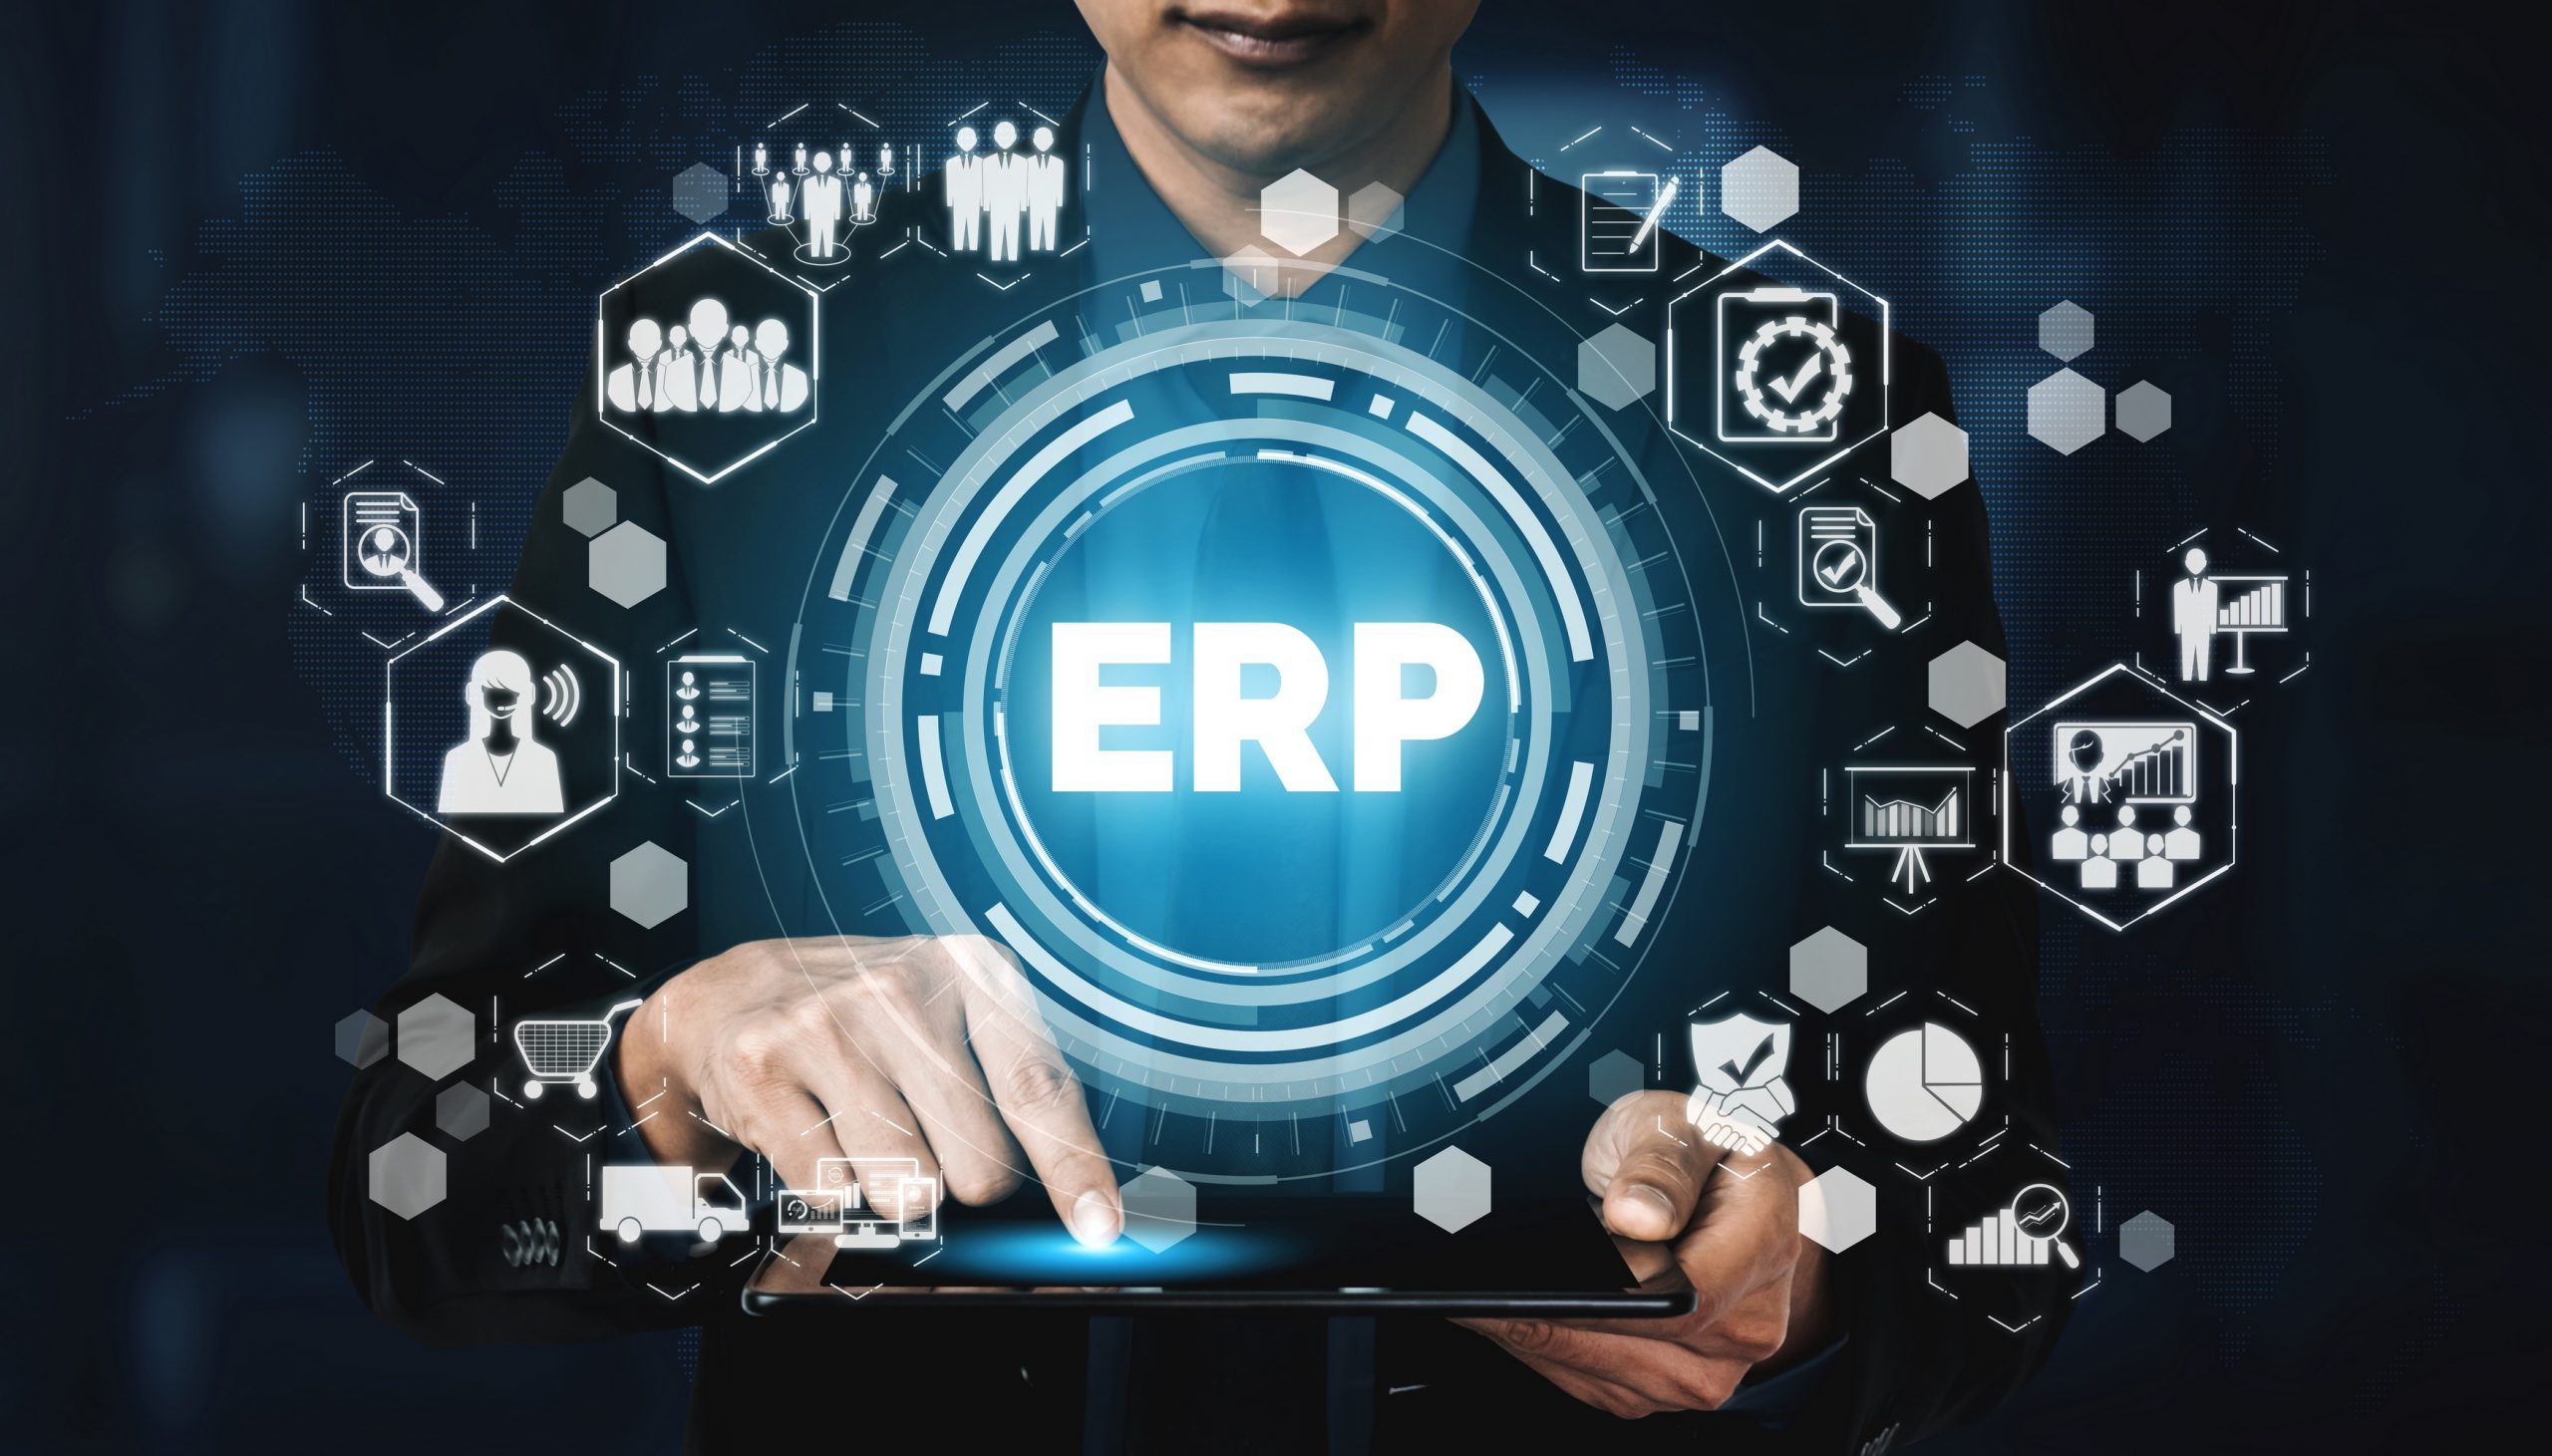 erp accounting system